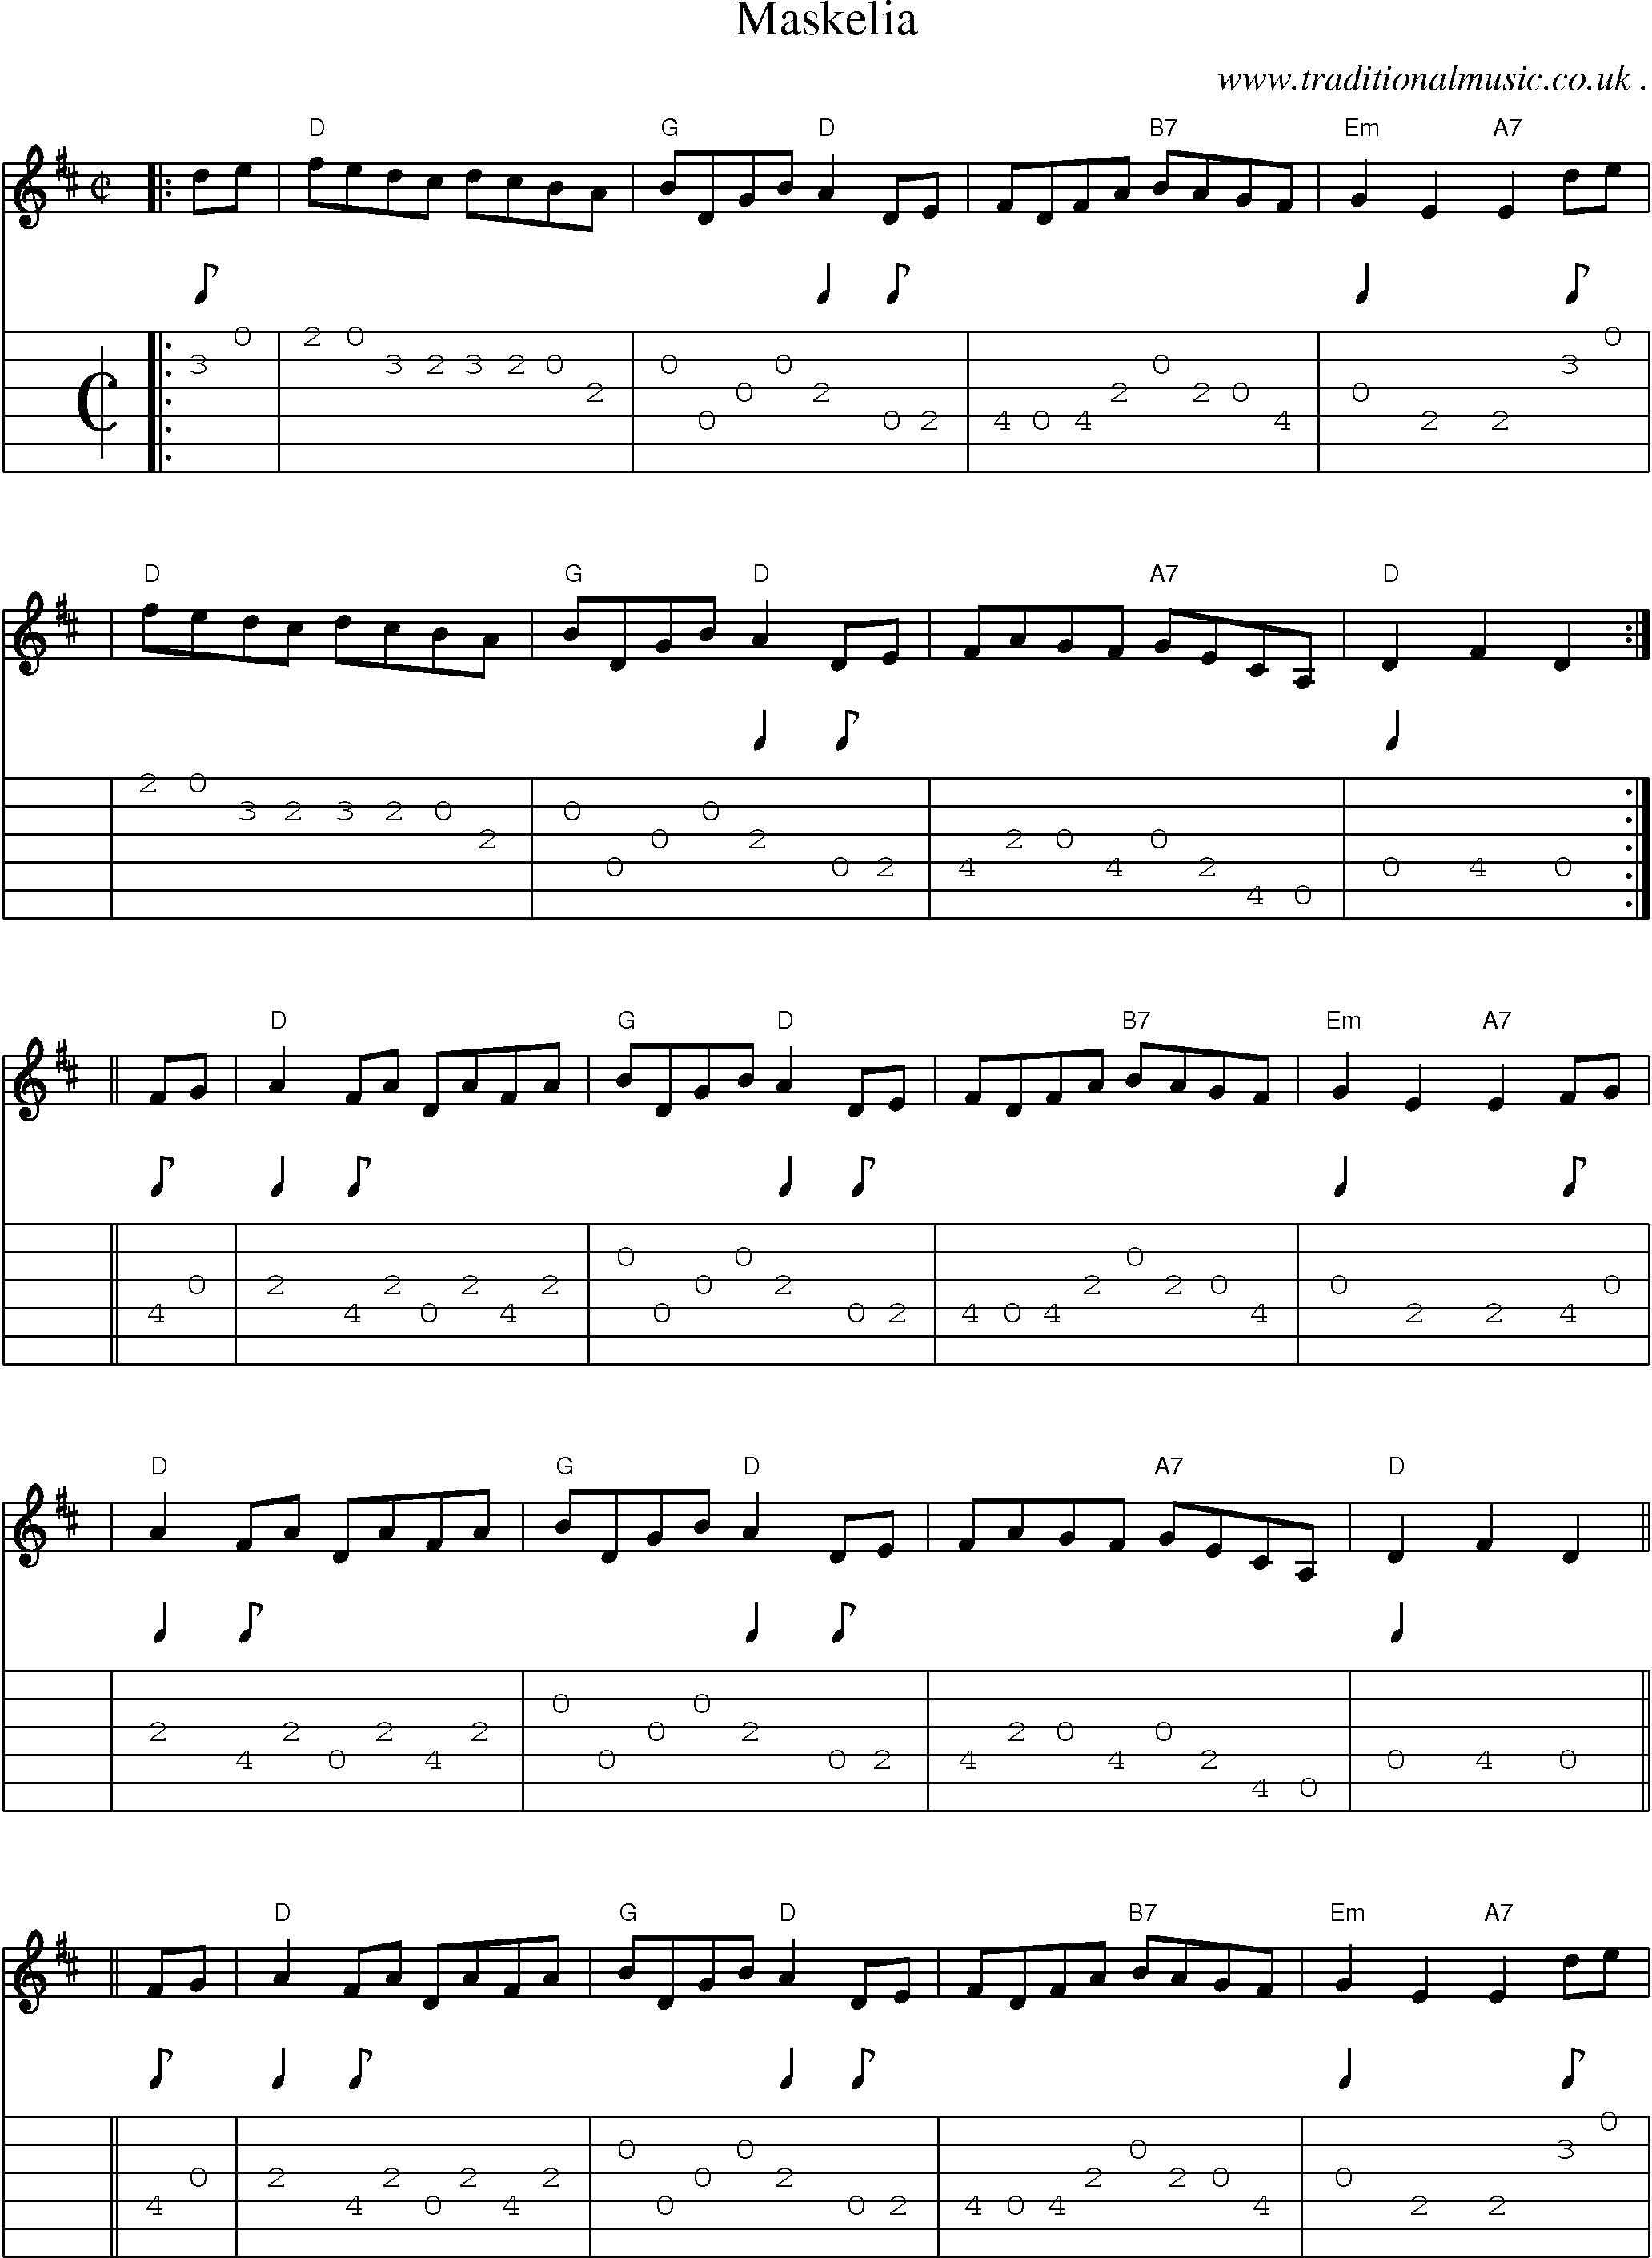 Sheet-music  score, Chords and Guitar Tabs for Maskelia